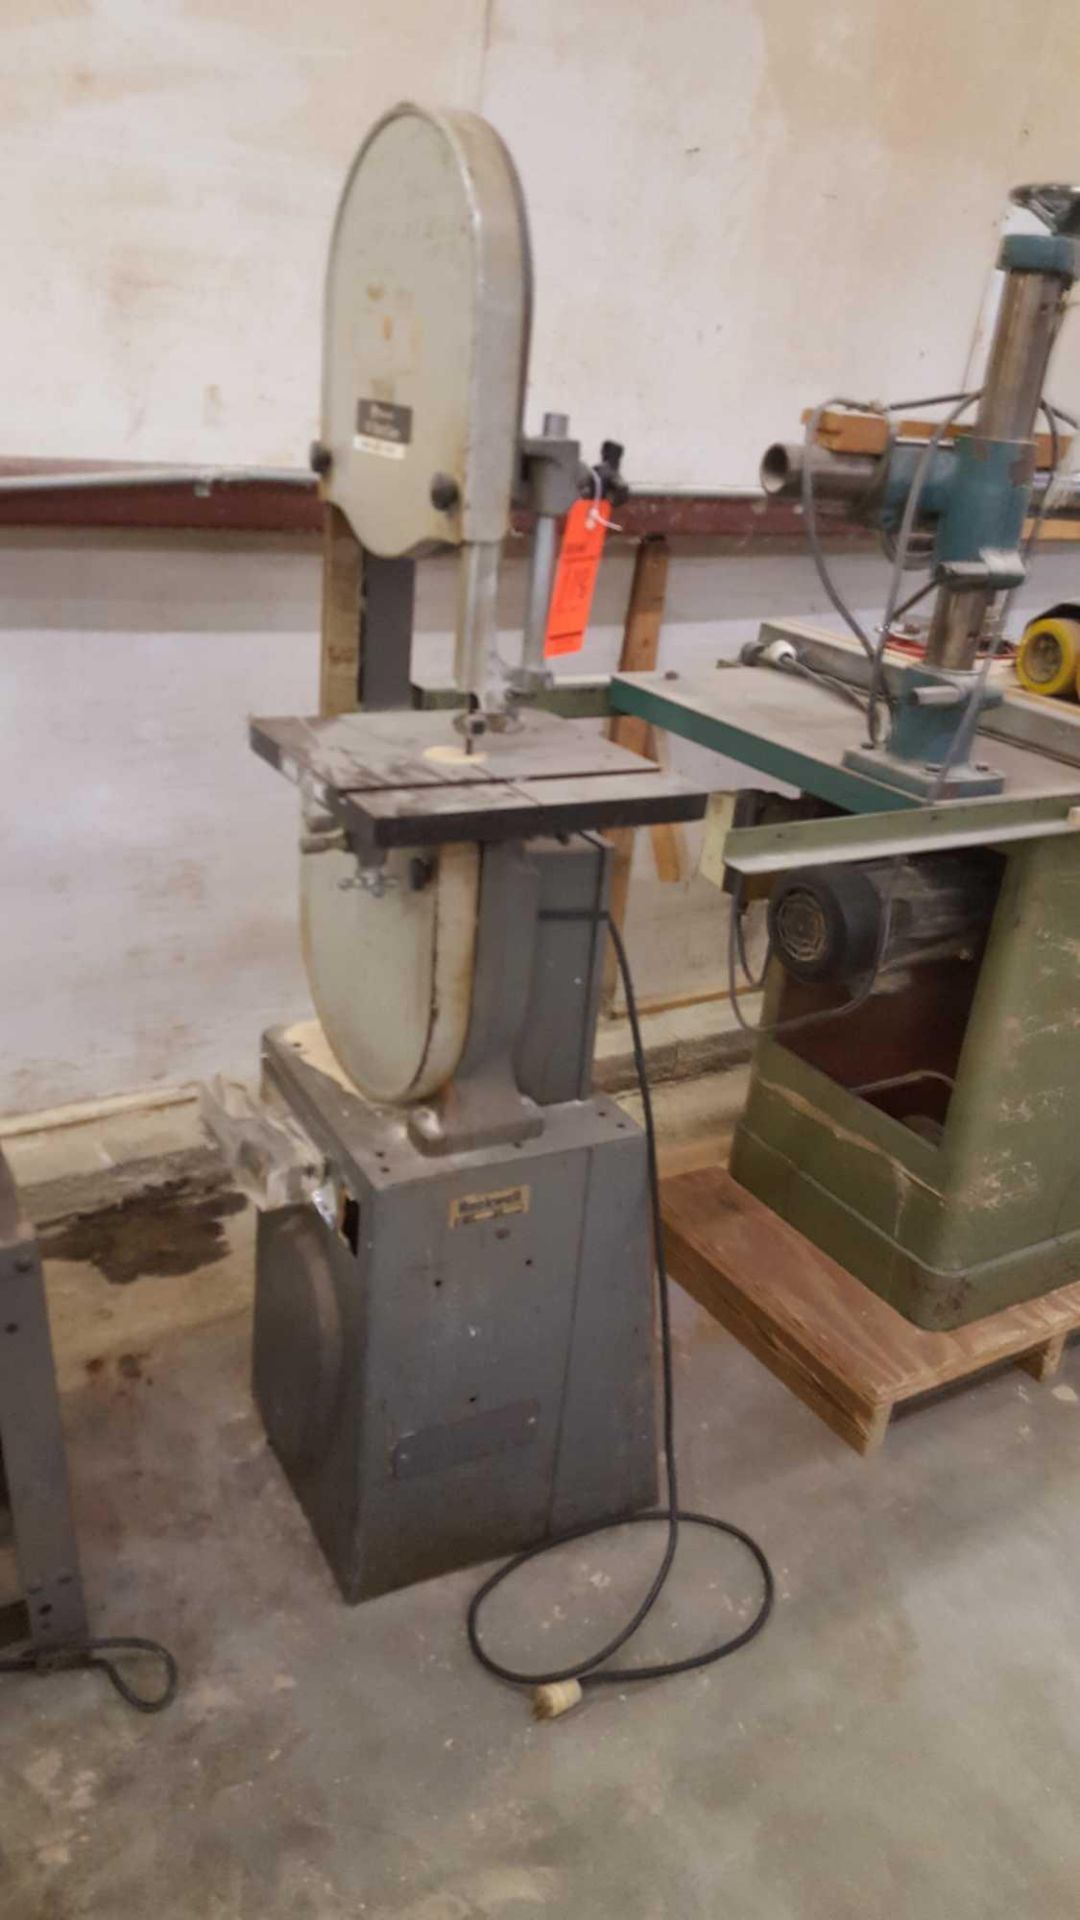 Rockwell 14 inch vertical bandsaw, number 1057, single phase - Image 2 of 2